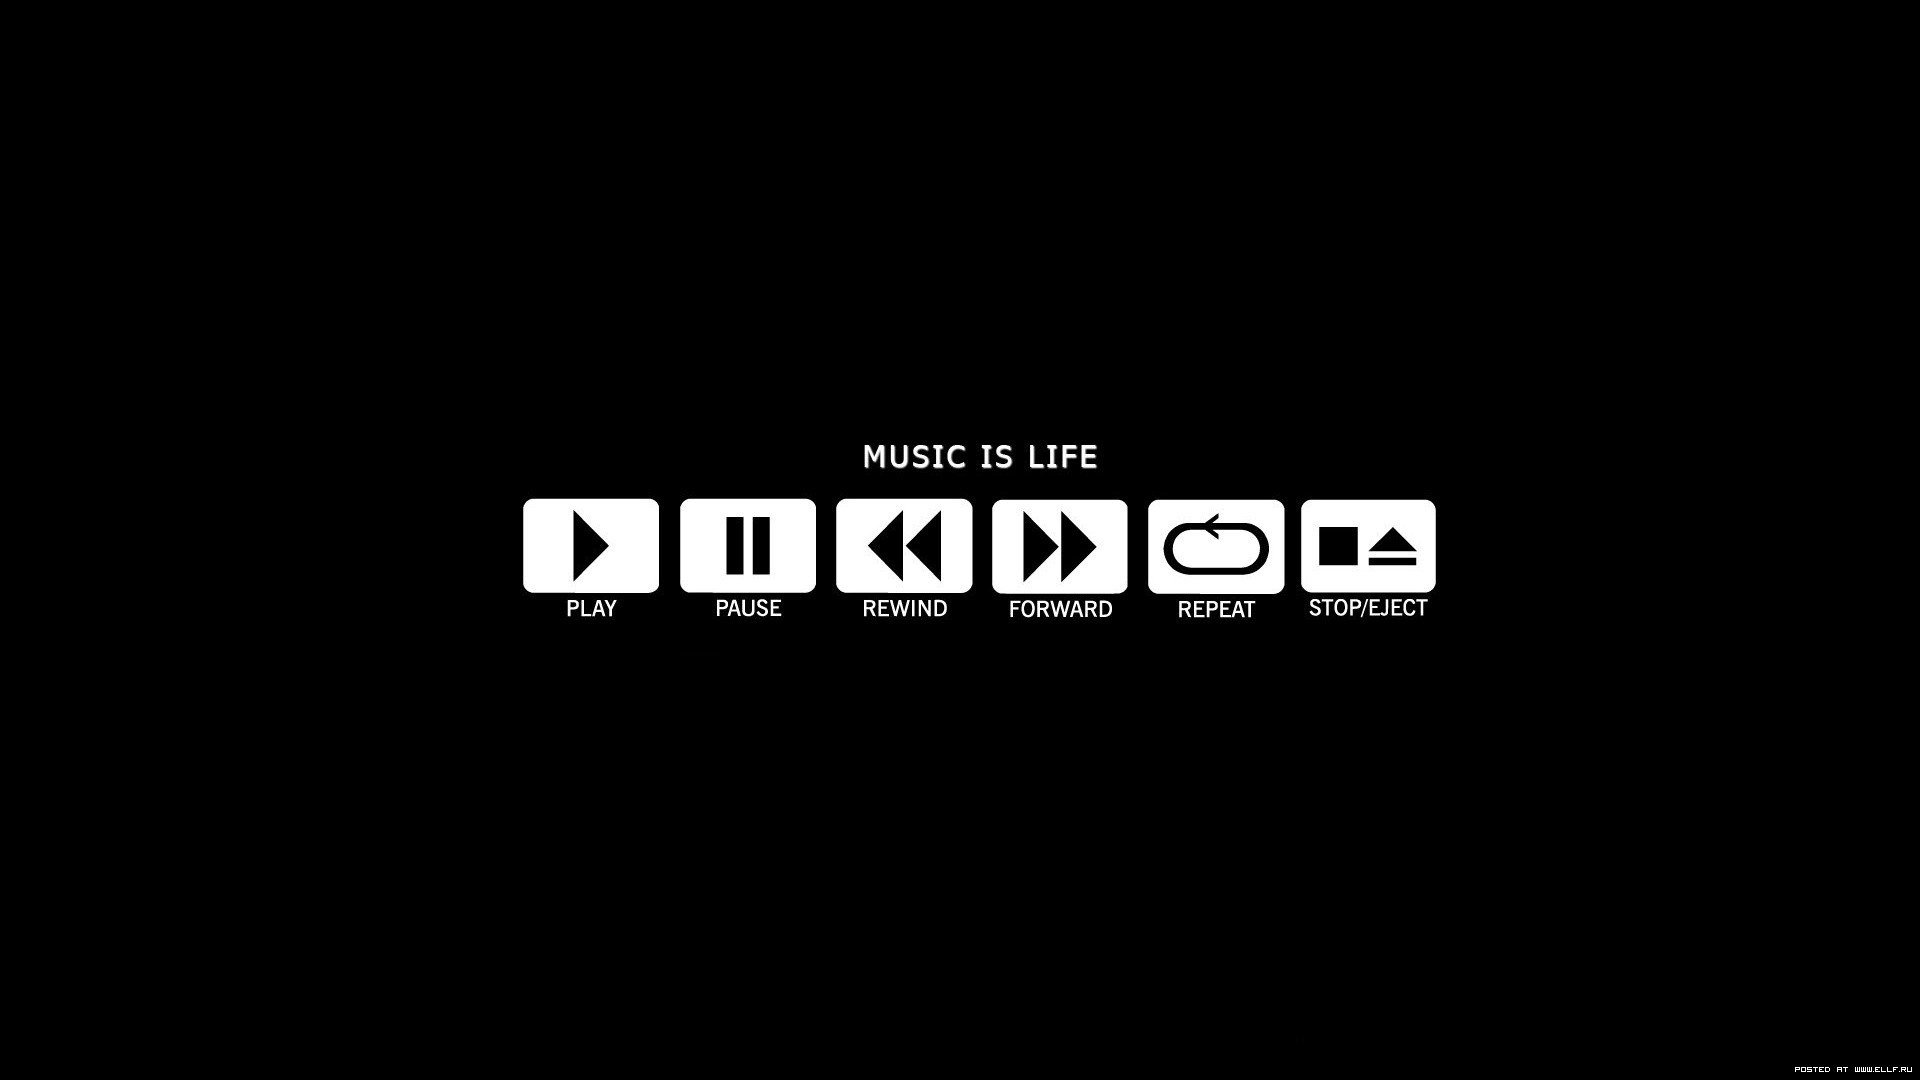 Wallpaper For Music Is Life Hd Best Pc Images Smartphone